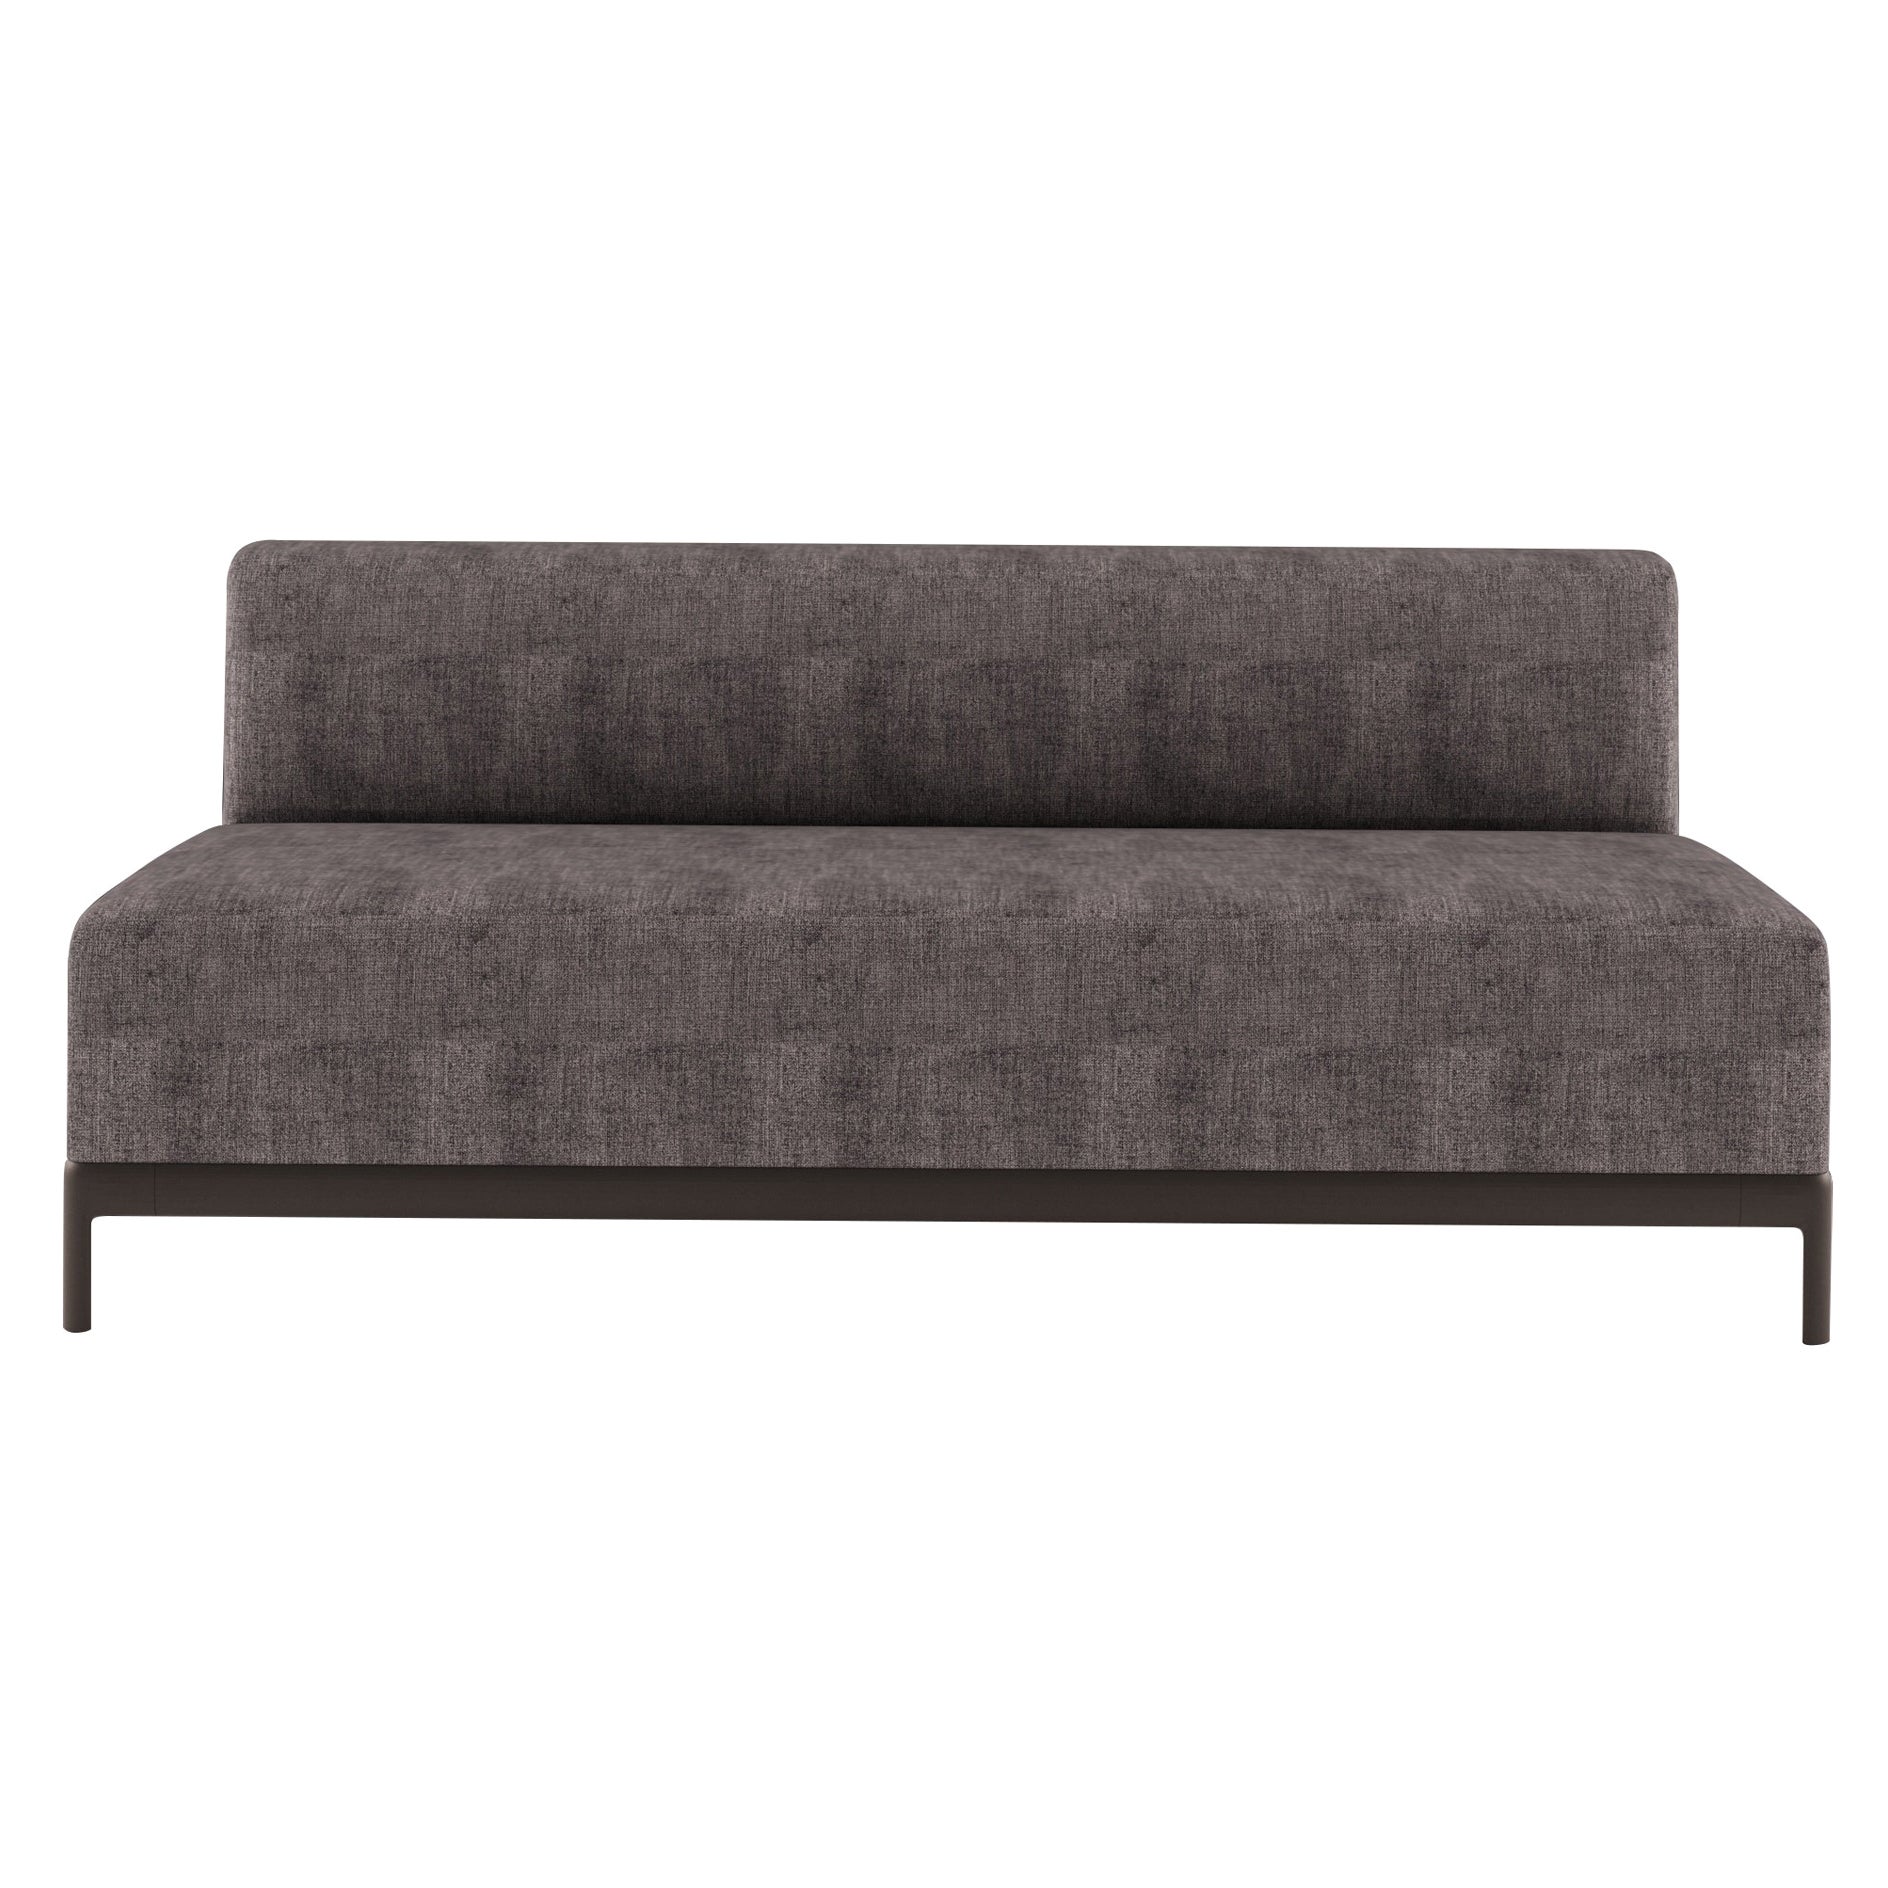 Alias P34 AluZen Soft Central Sofa with Upholstery & Lacquered Aluminum Frame For Sale